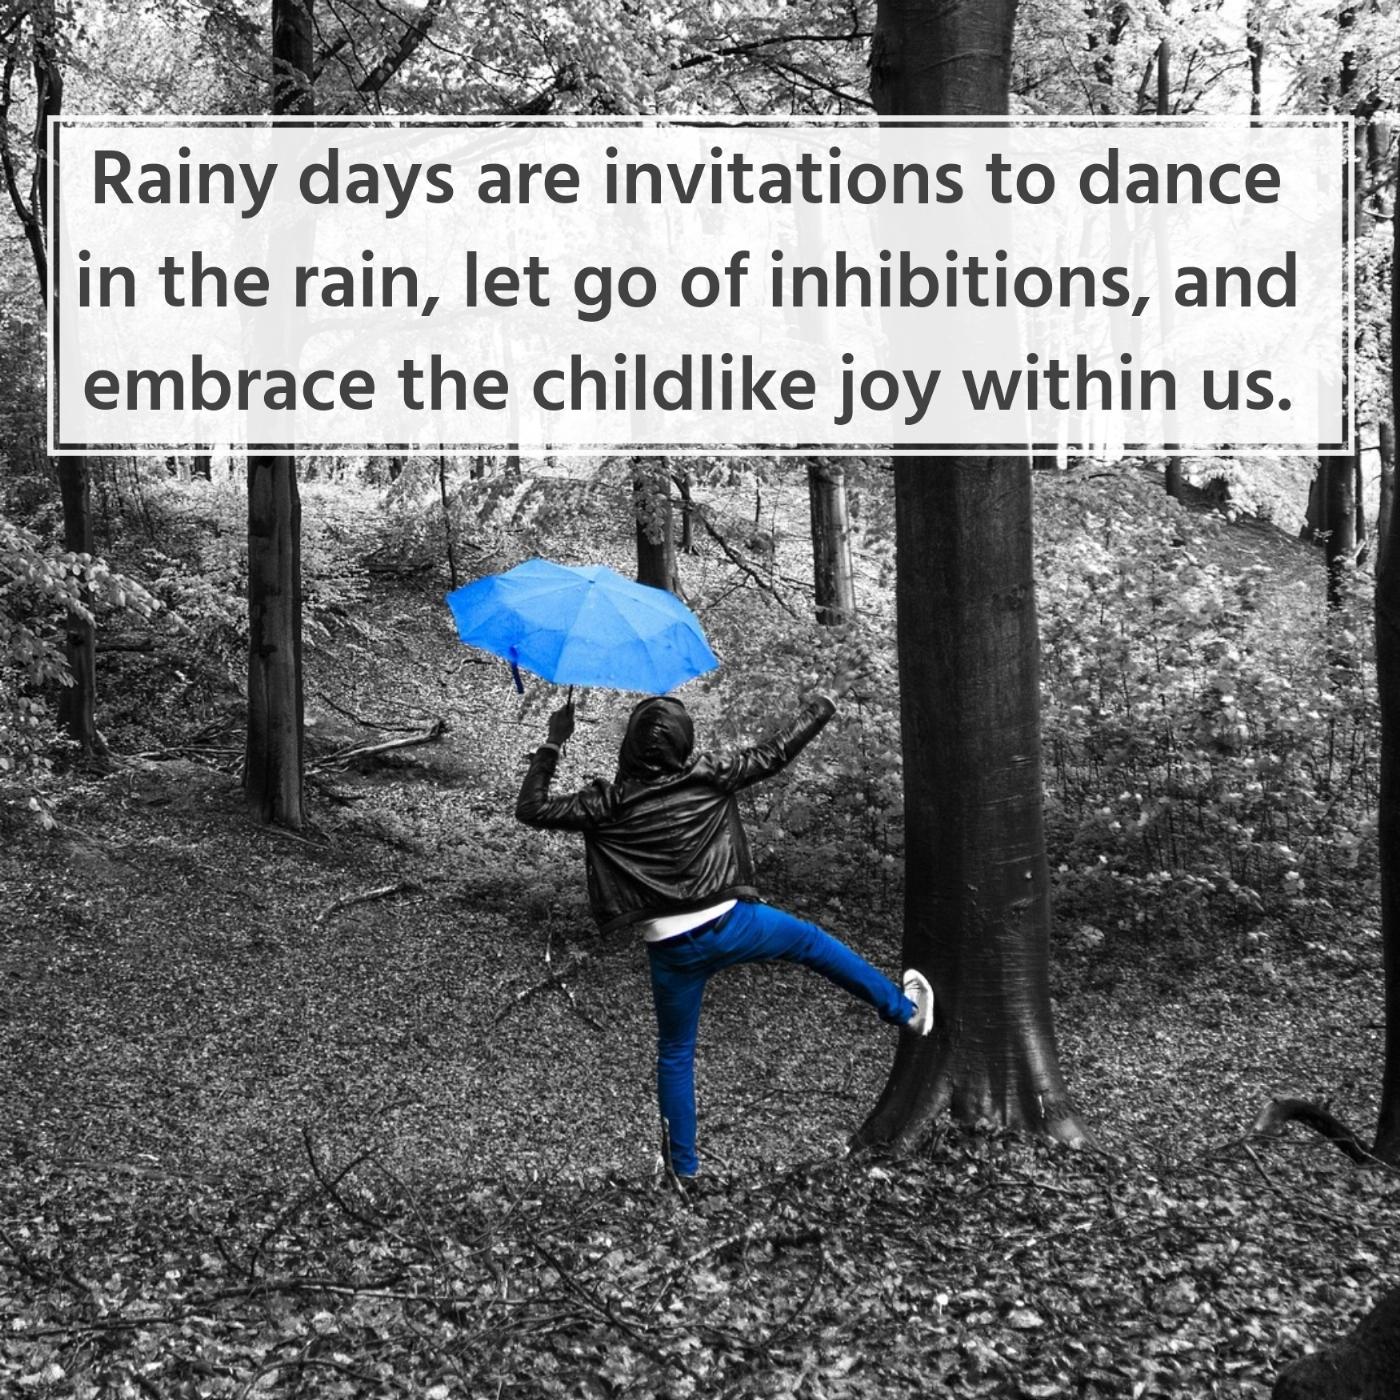 Rainy days are invitations to dance in the rain let go of inhibitions